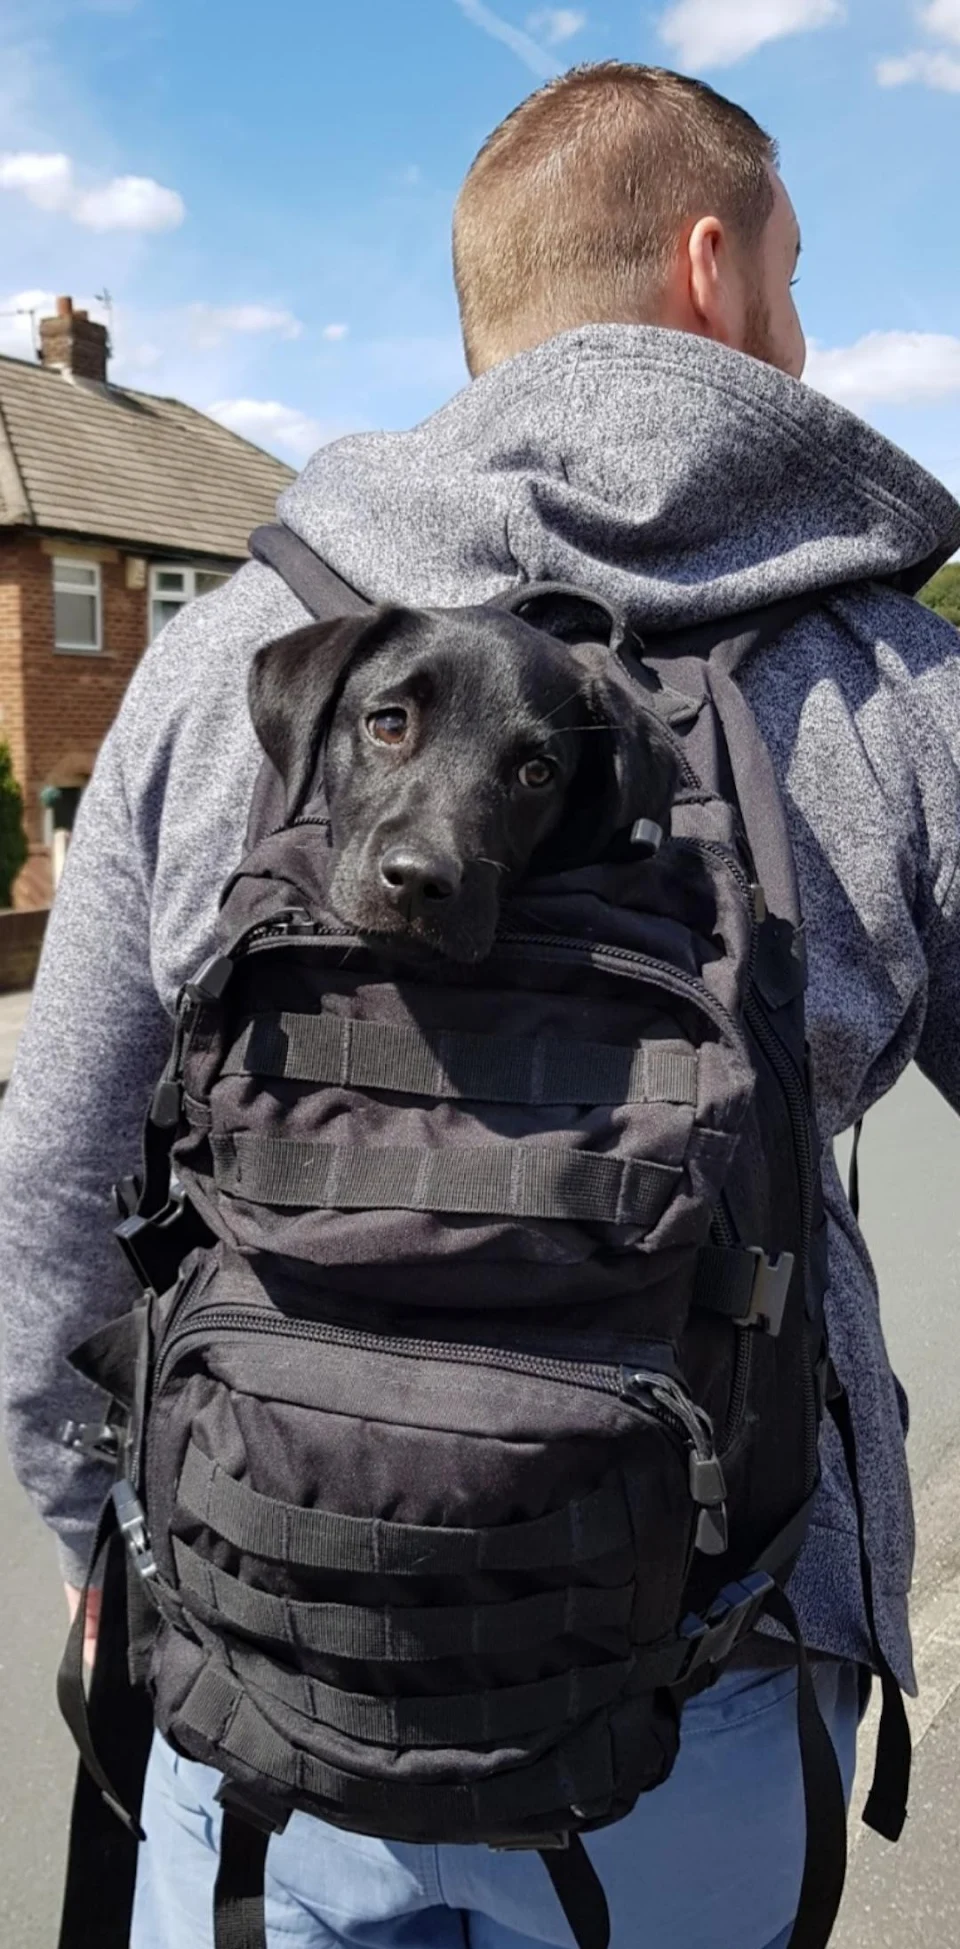 Backpack Pupper after breaking a leg. The eyes say 